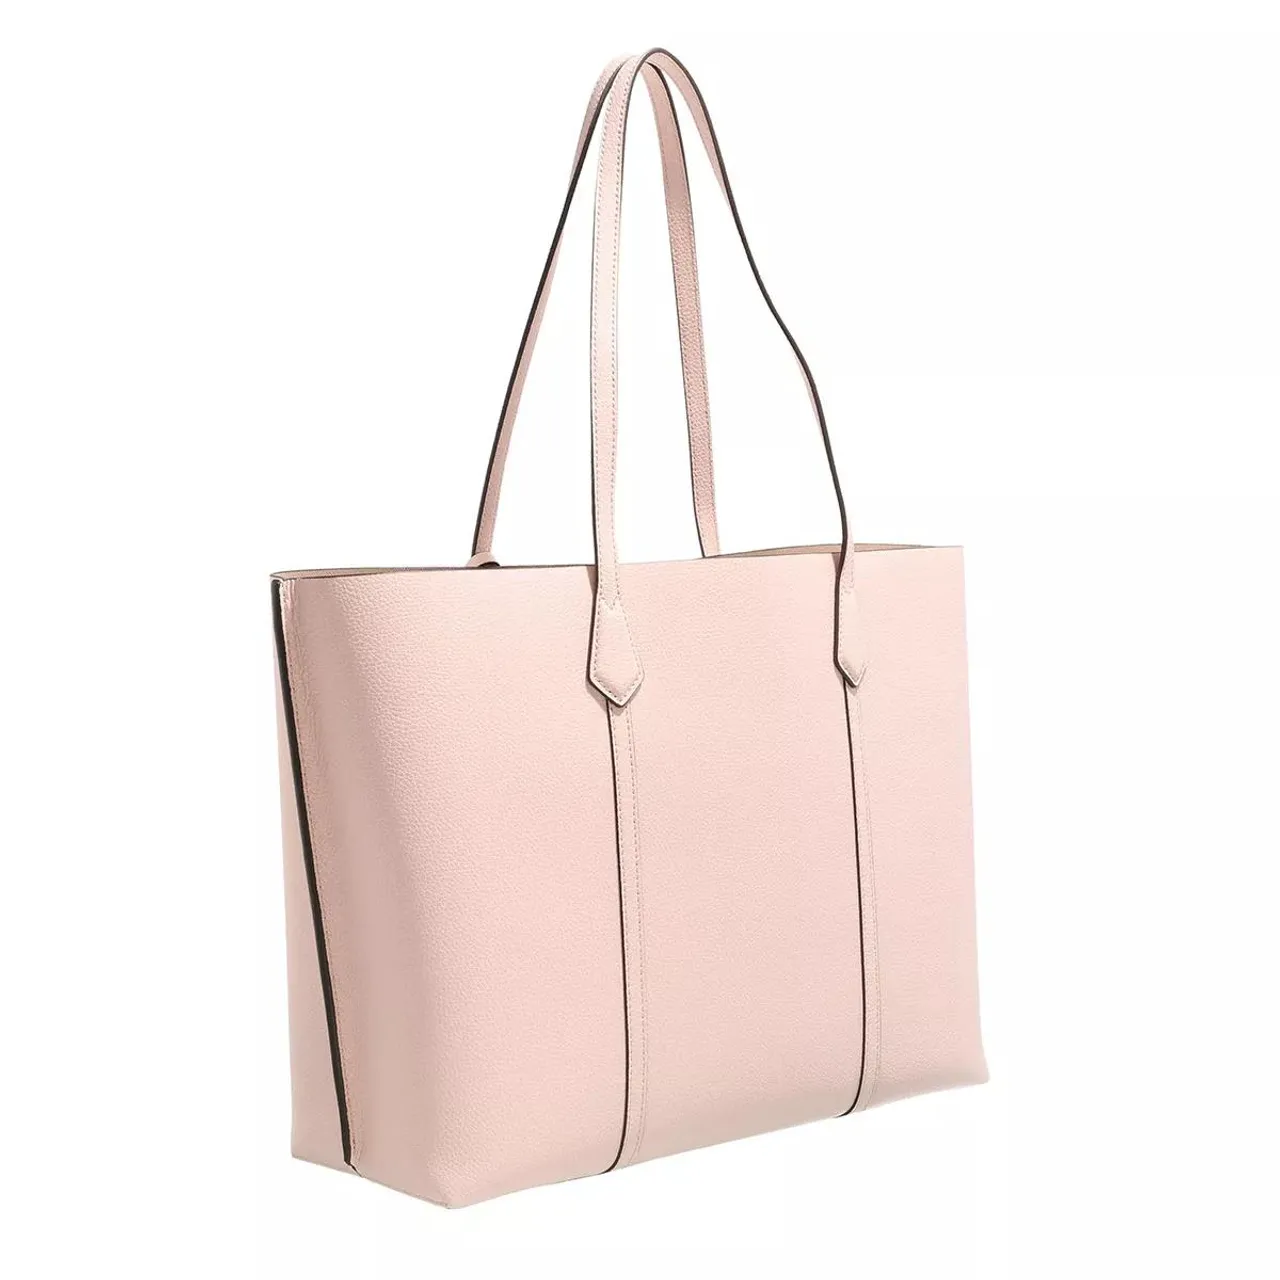 Tory Burch Tote Bags - Perry Triple Compartment Tote - rose - Tote Bags for ladies